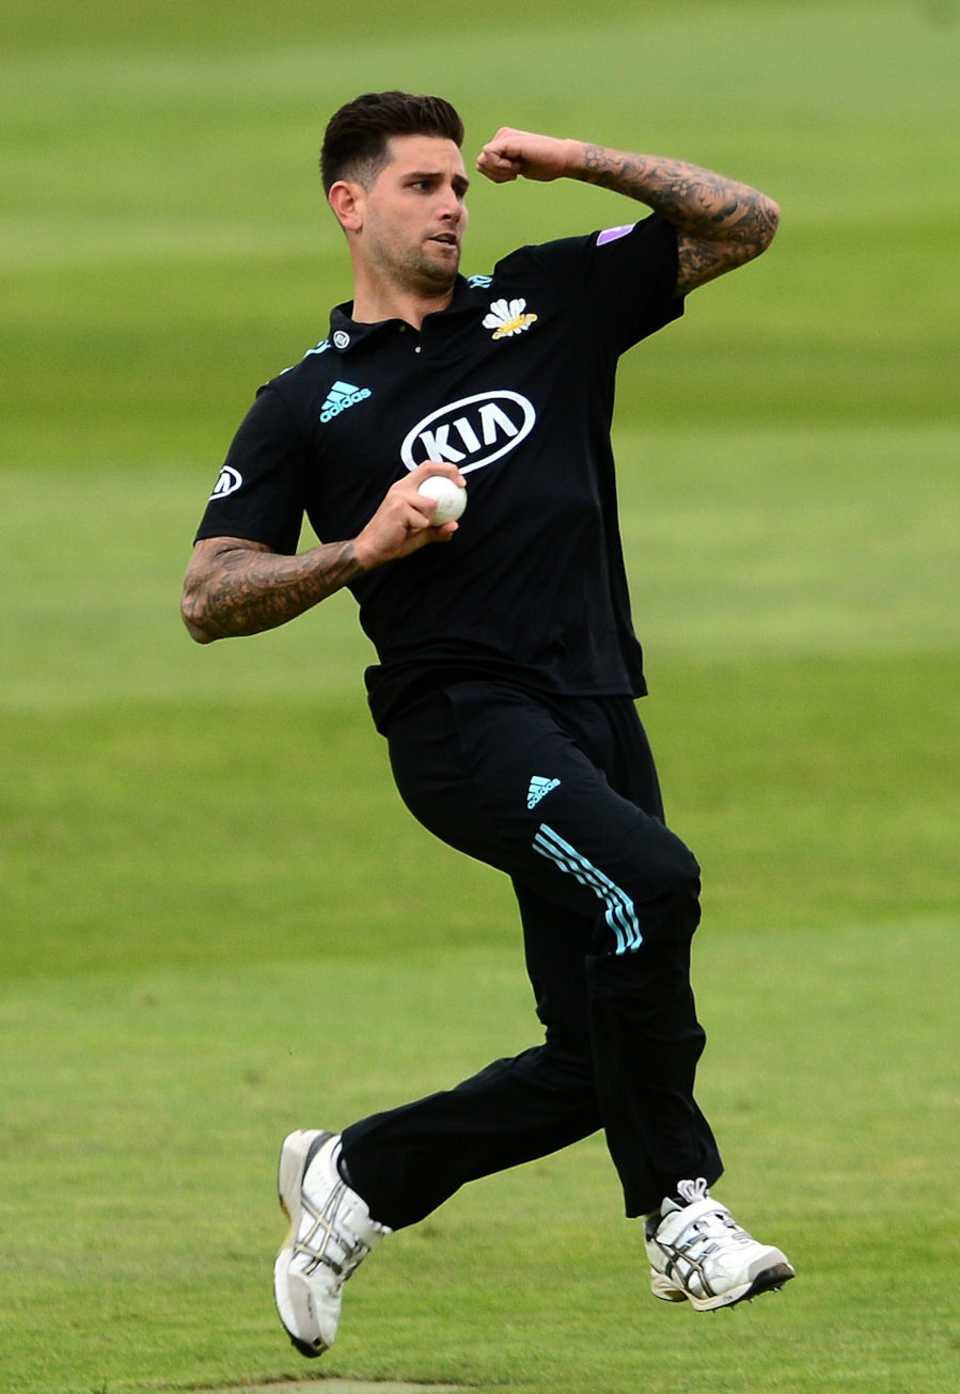 Jade Dernbach was left unrewarded as Somerset recovered from 22 for 5